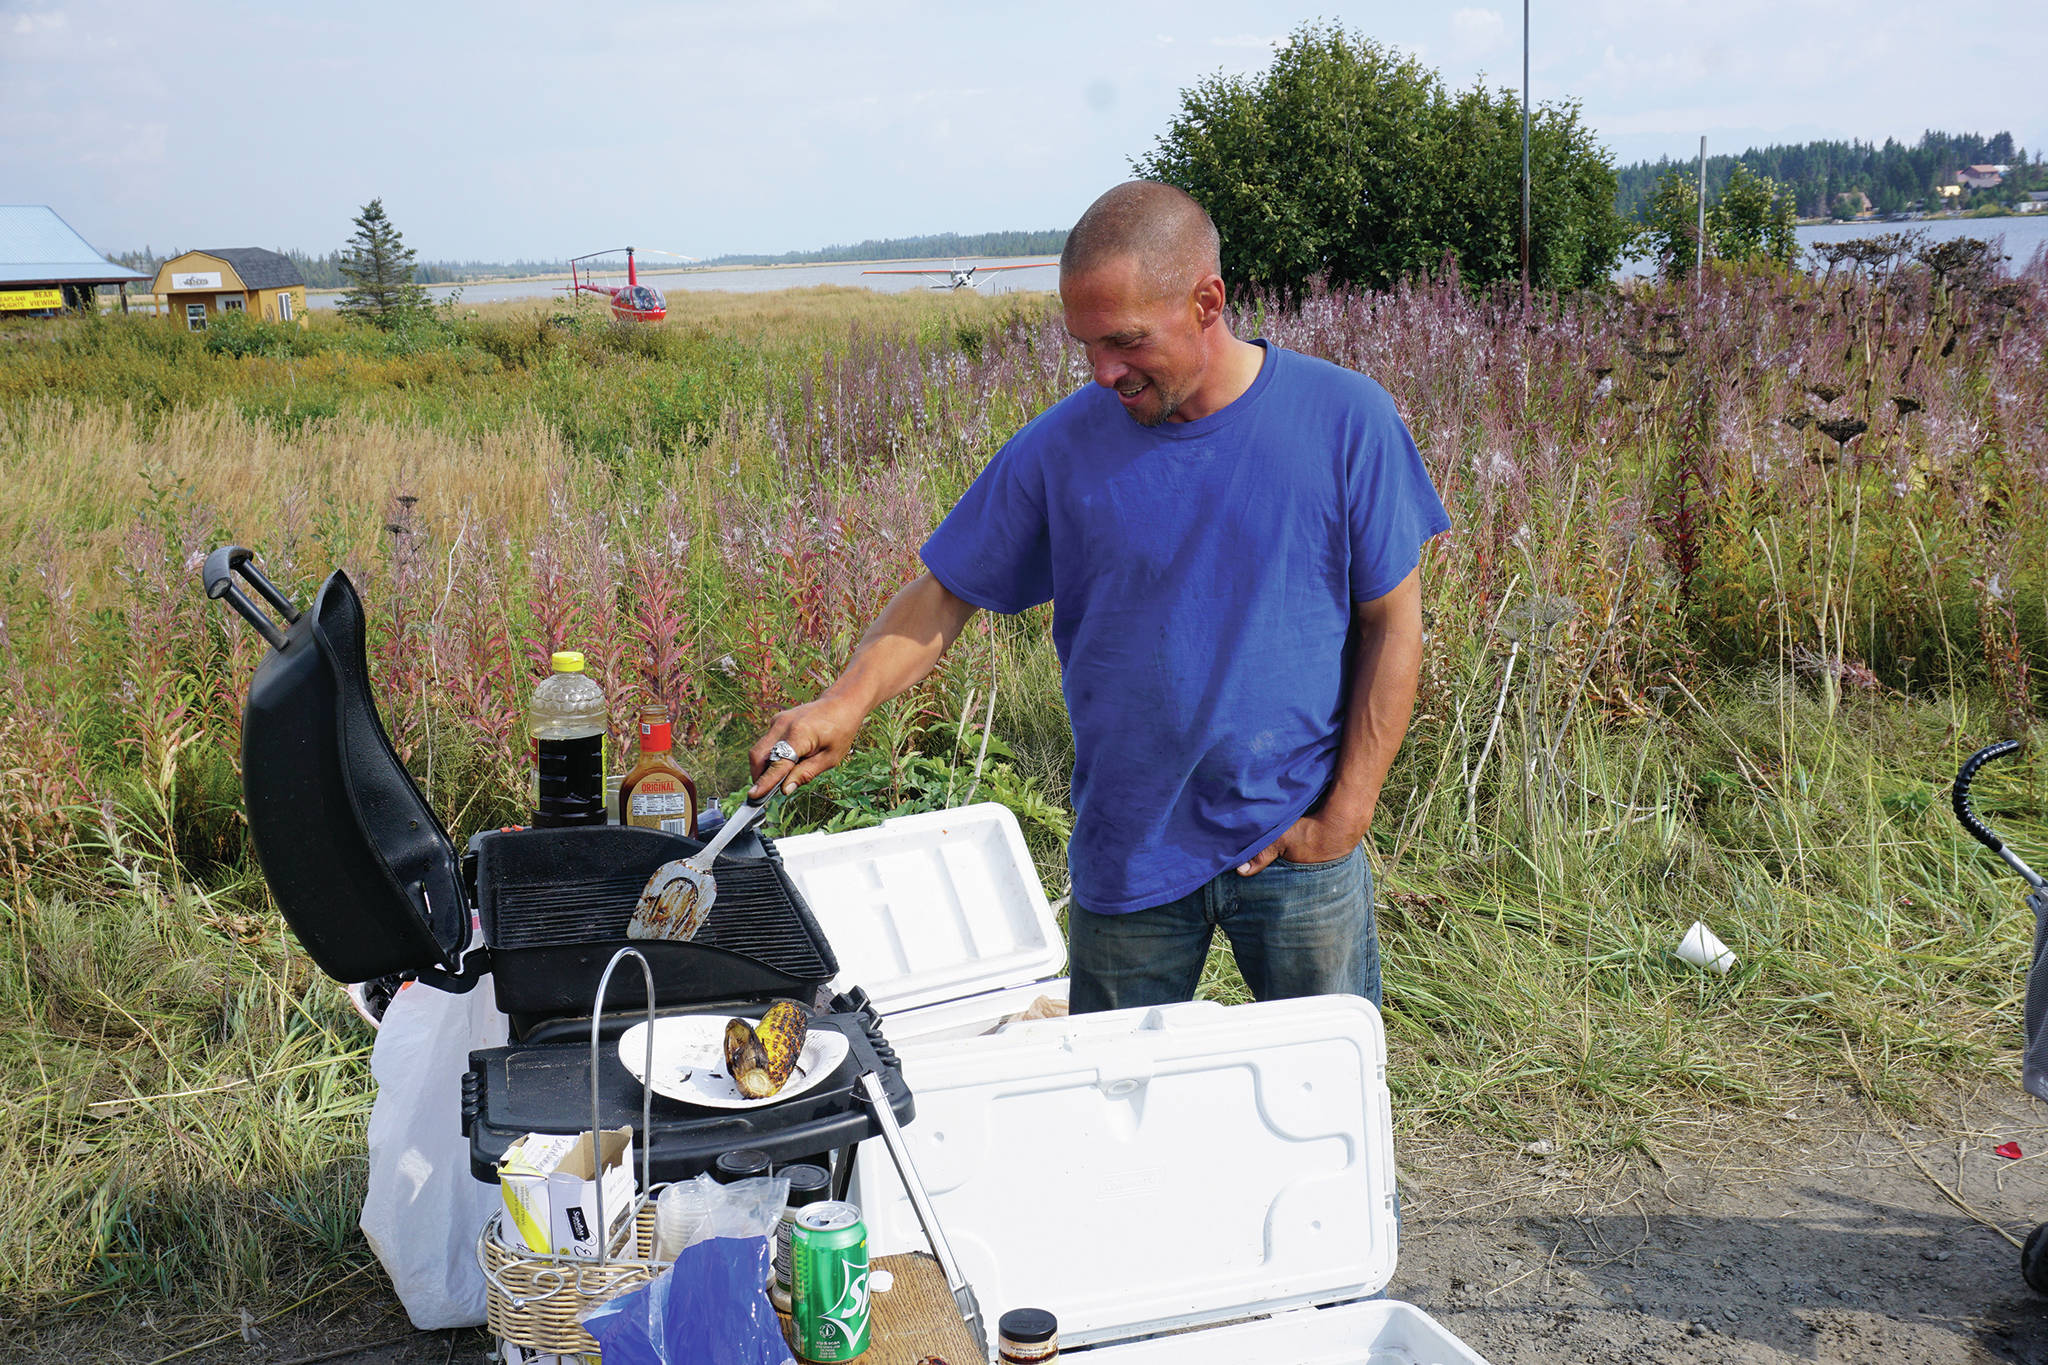 Jacob Wright works a barbecue grill by Beluga Lake on Lake Street on Monday, Aug. 26, 2019, in Homer, Alaska. Wright has been offering free food and coffee at the roadside stand and before that at Baycrest Hill. A recent arrival to Homer with his wife and two children, Wright said when he first came to Homer six weeks ago, he had mechanical troubles and then someone stole his wallet with all his gas and cards. People helped him get back on his feet, and now he’s returning the favor by offering free food. People also have given him donations of food and fish to keep his grill going. “We’re giving back to the community that helped us,” Wright said. “…This is the Alaska spirit. This is what Alaska is all about.”